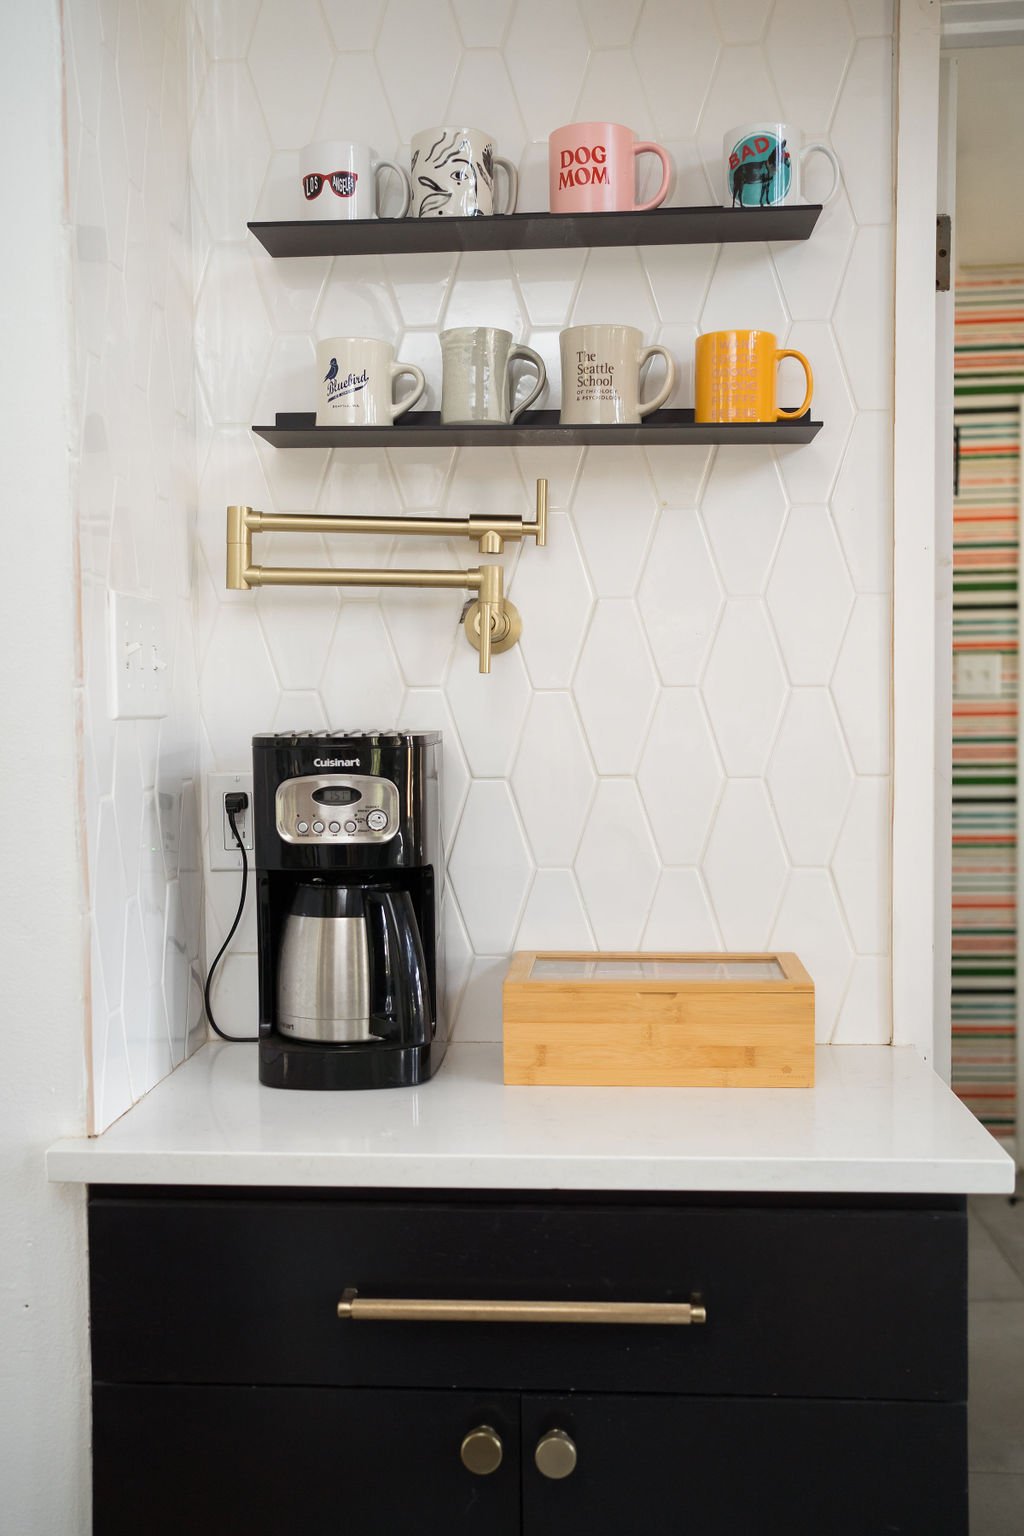 Integrated coffee station as part of a mid-century modern kitchen remodel.